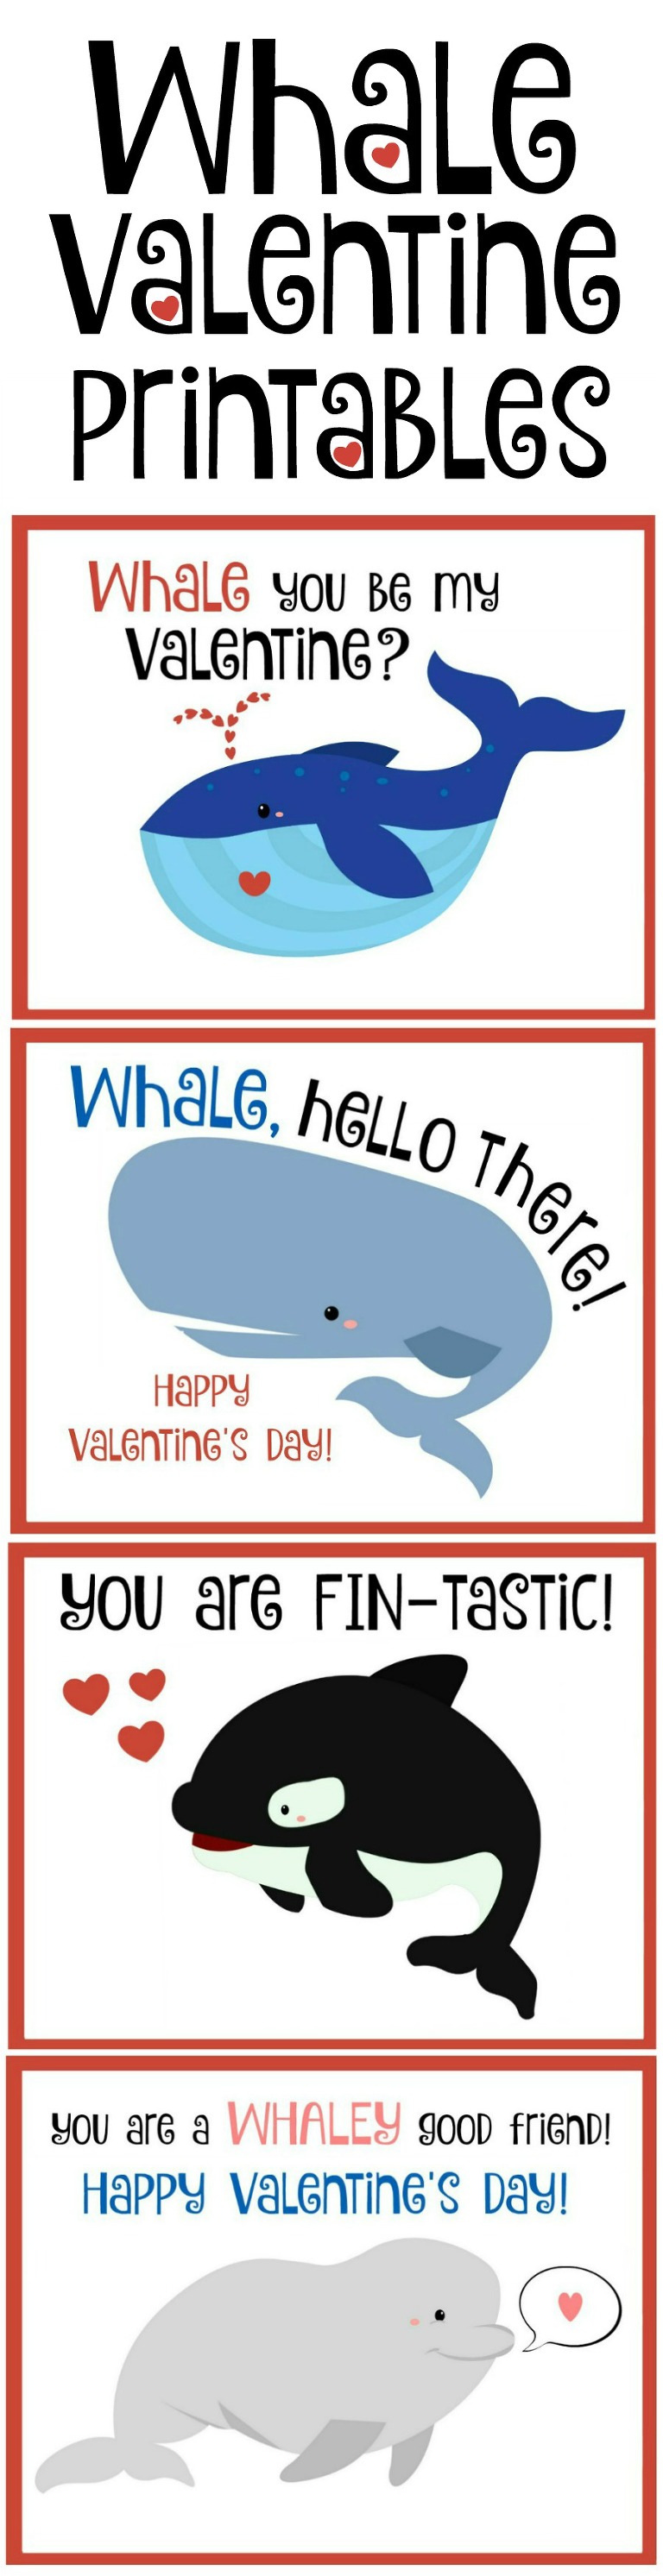 Whale valentines with free printables. Four designs to choose from.